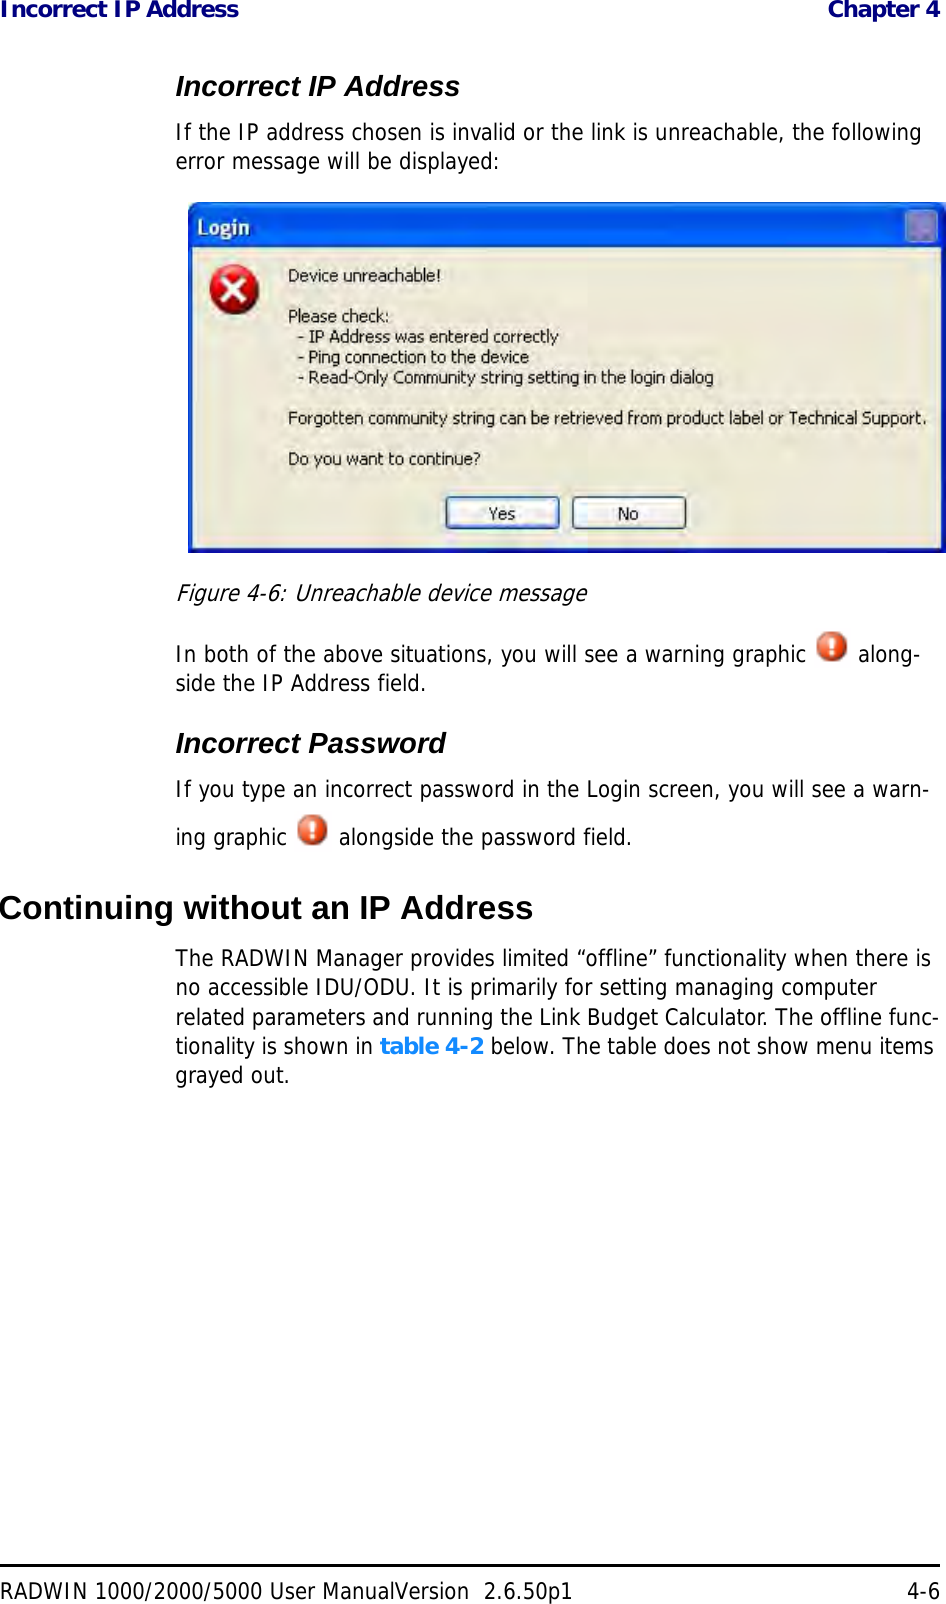 Incorrect IP Address  Chapter 4RADWIN 1000/2000/5000 User ManualVersion  2.6.50p1 4-6Incorrect IP AddressIf the IP address chosen is invalid or the link is unreachable, the following error message will be displayed:Figure 4-6: Unreachable device messageIn both of the above situations, you will see a warning graphic   along-side the IP Address field.Incorrect PasswordIf you type an incorrect password in the Login screen, you will see a warn-ing graphic   alongside the password field.Continuing without an IP AddressThe RADWIN Manager provides limited “offline” functionality when there is no accessible IDU/ODU. It is primarily for setting managing computer related parameters and running the Link Budget Calculator. The offline func-tionality is shown in table 4-2 below. The table does not show menu items grayed out.